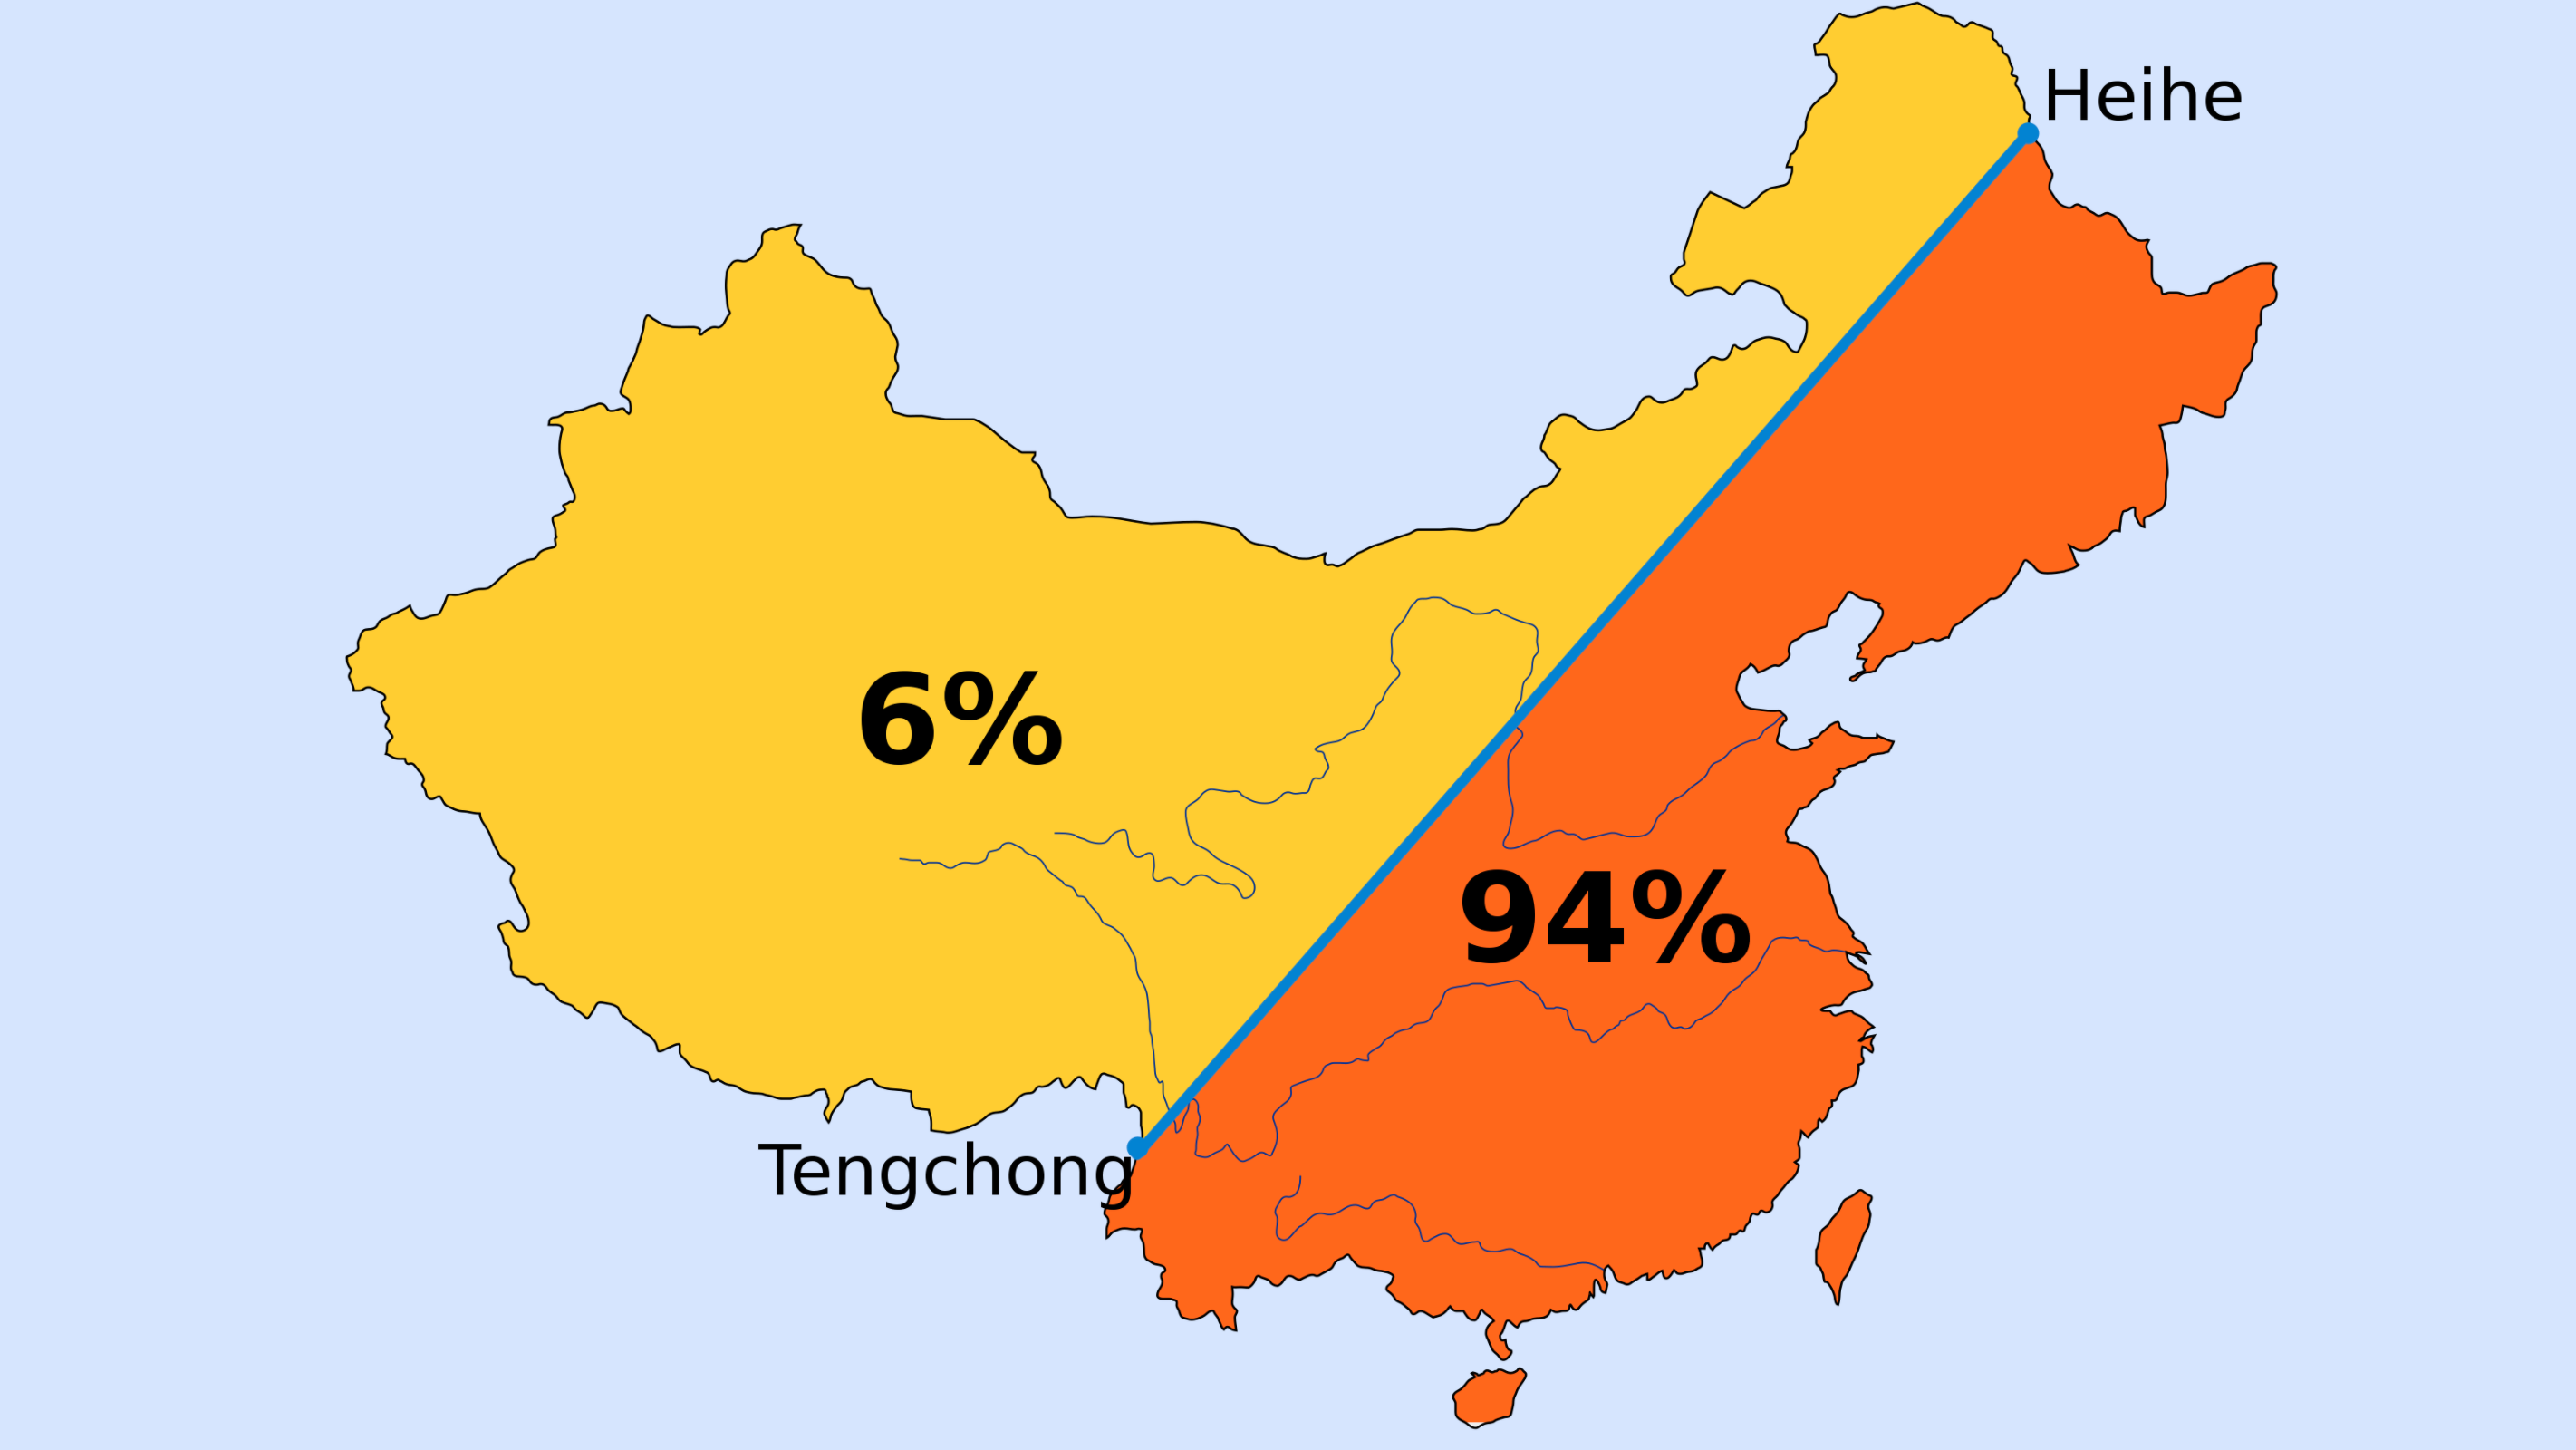 For central heat, China has a north-south divide at Qin-Huai line